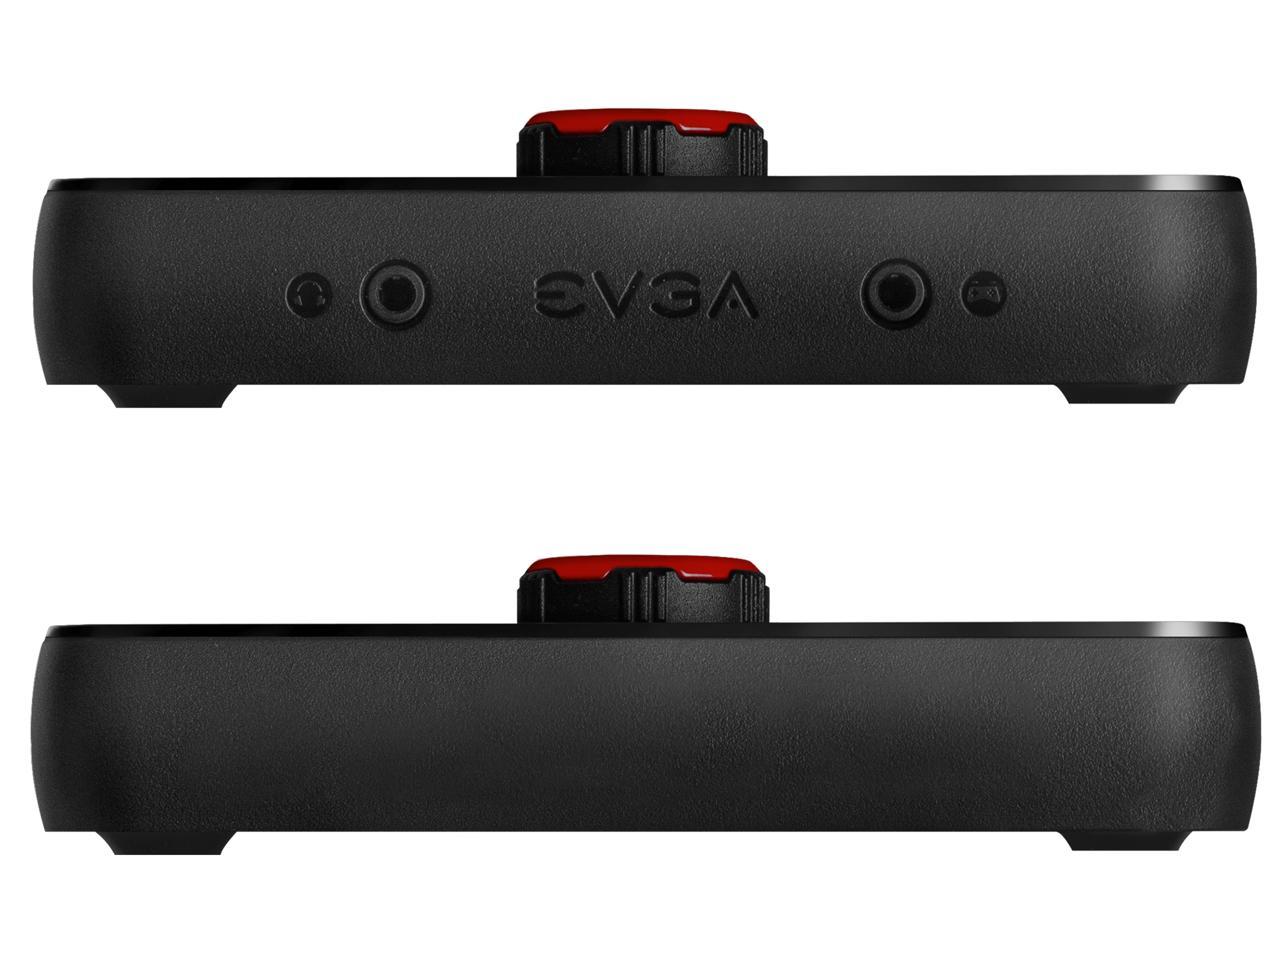 Evga Xr1 Capture Device, Certified For Obs, Usb 3.0, 4K Pass Through, Argb, Audio Mixer